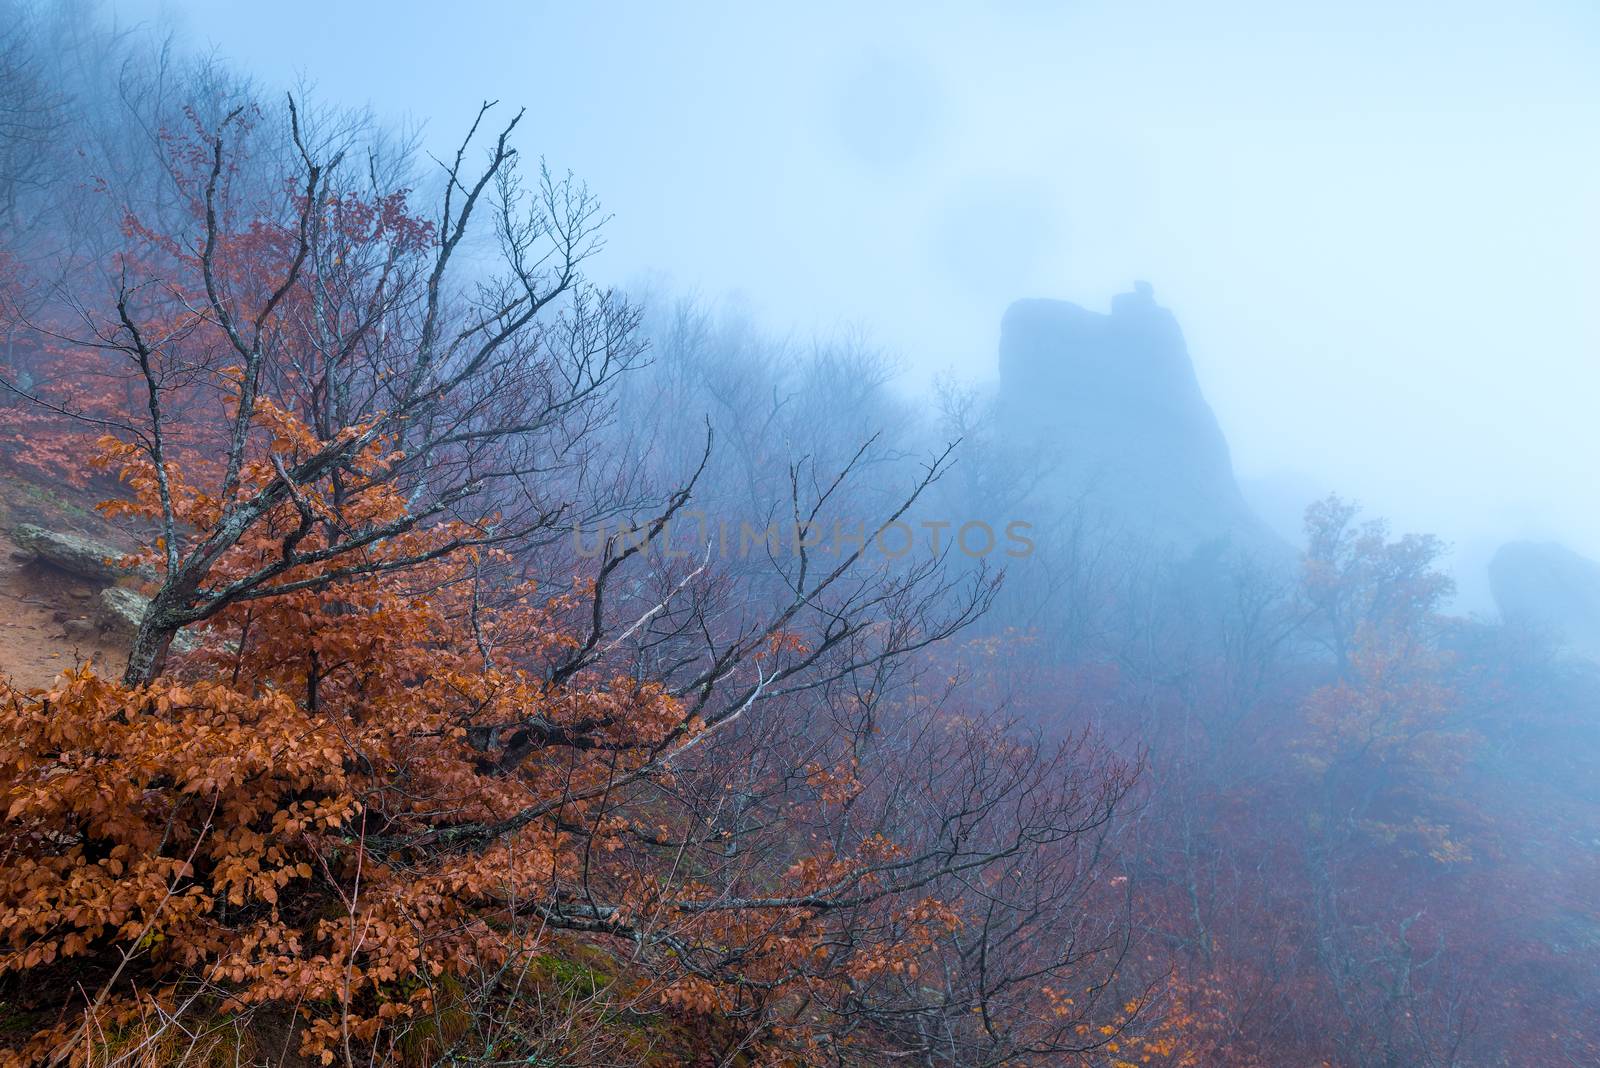 High cliff and gloomy bare branches of trees in autumn during fo by kosmsos111